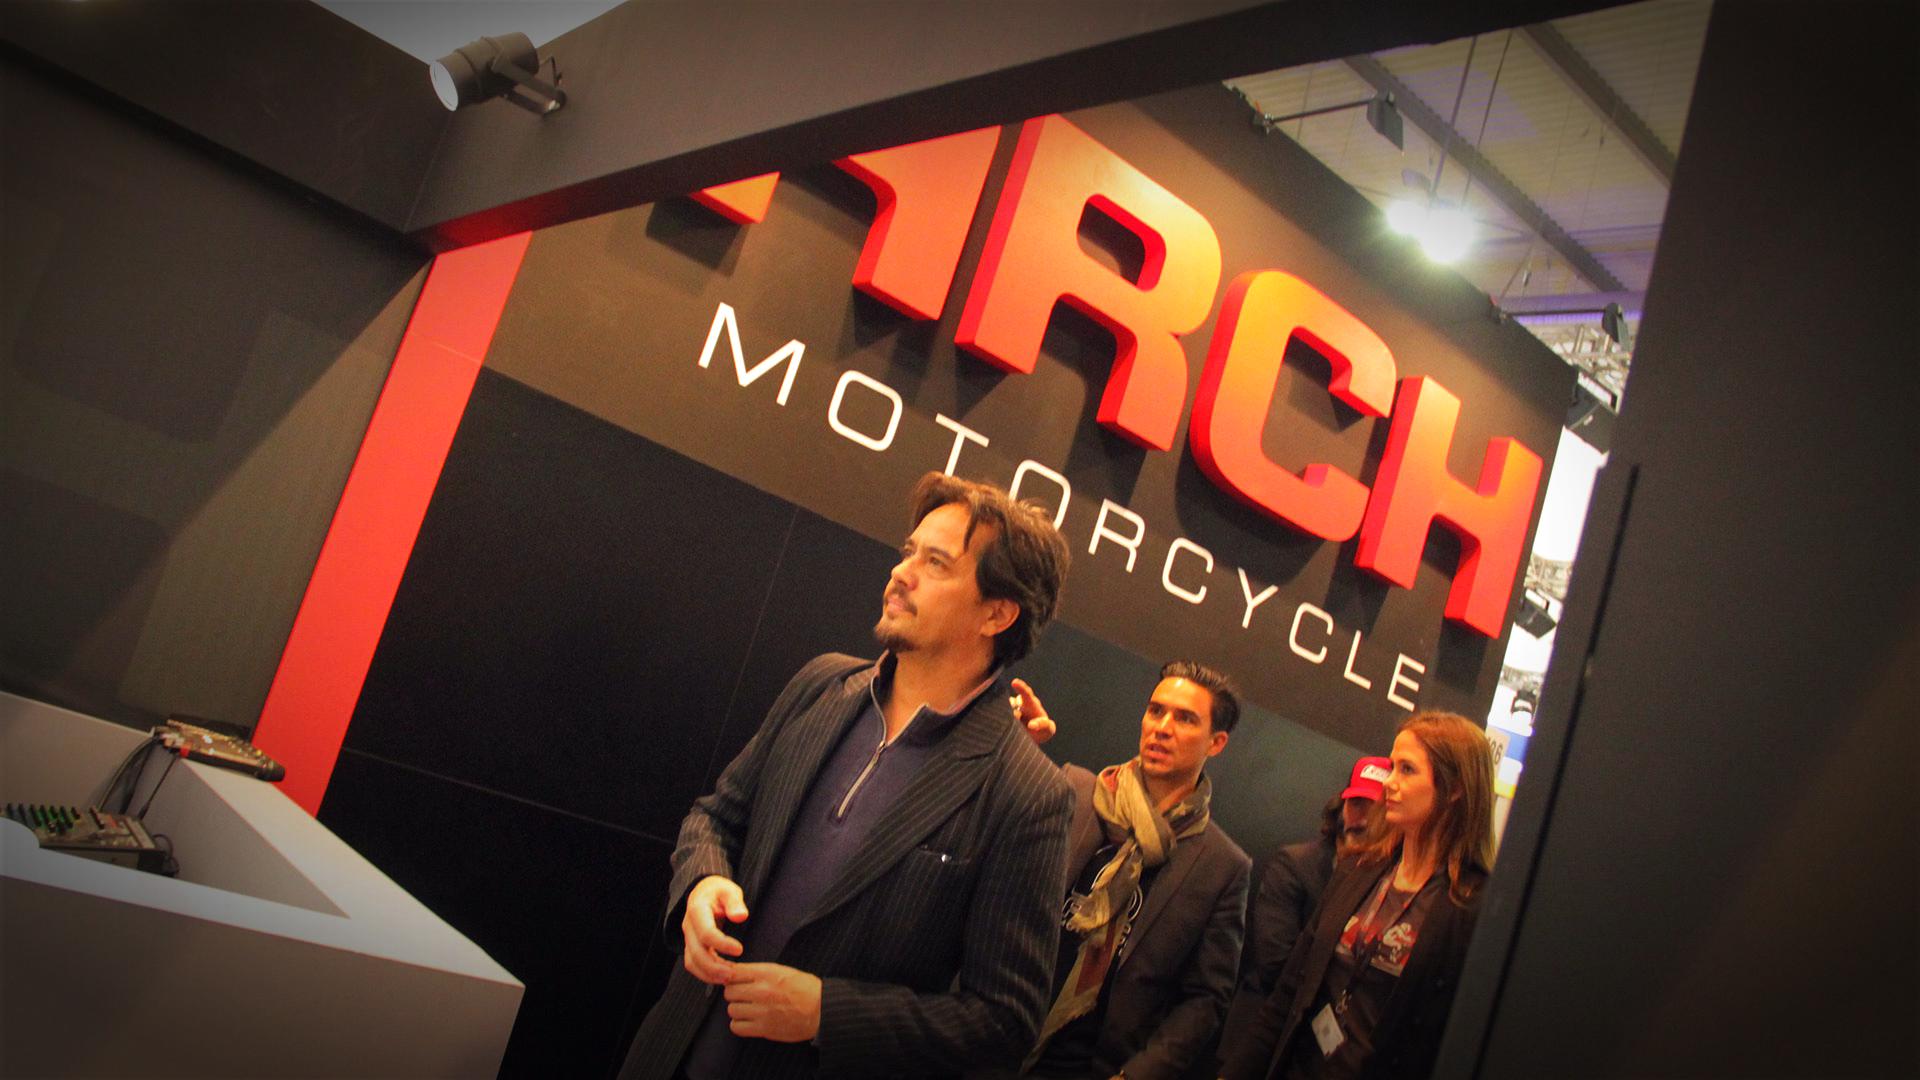 arch-motorcycle-eicma-2017-keanu-reeves